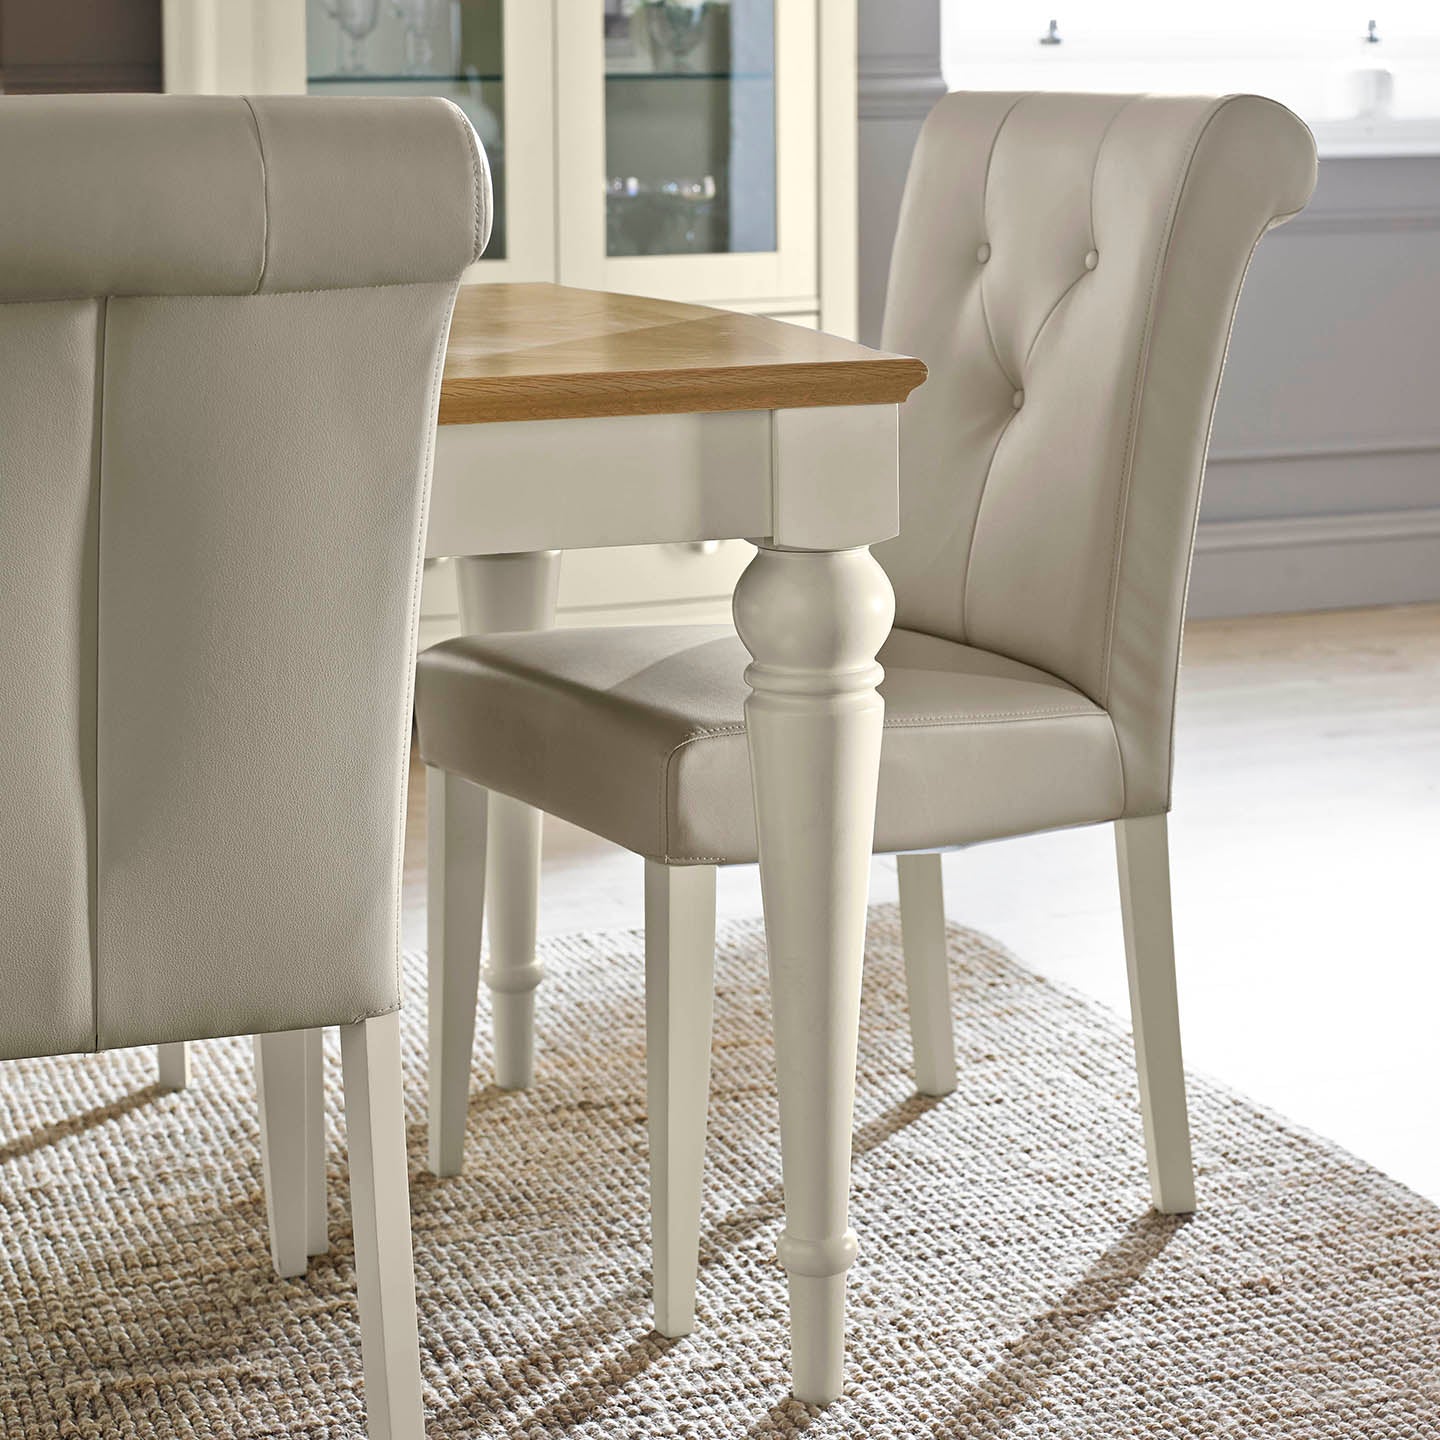 Montreux Leather Dining Chair - Ivory from UpstairsDownstairs.ie